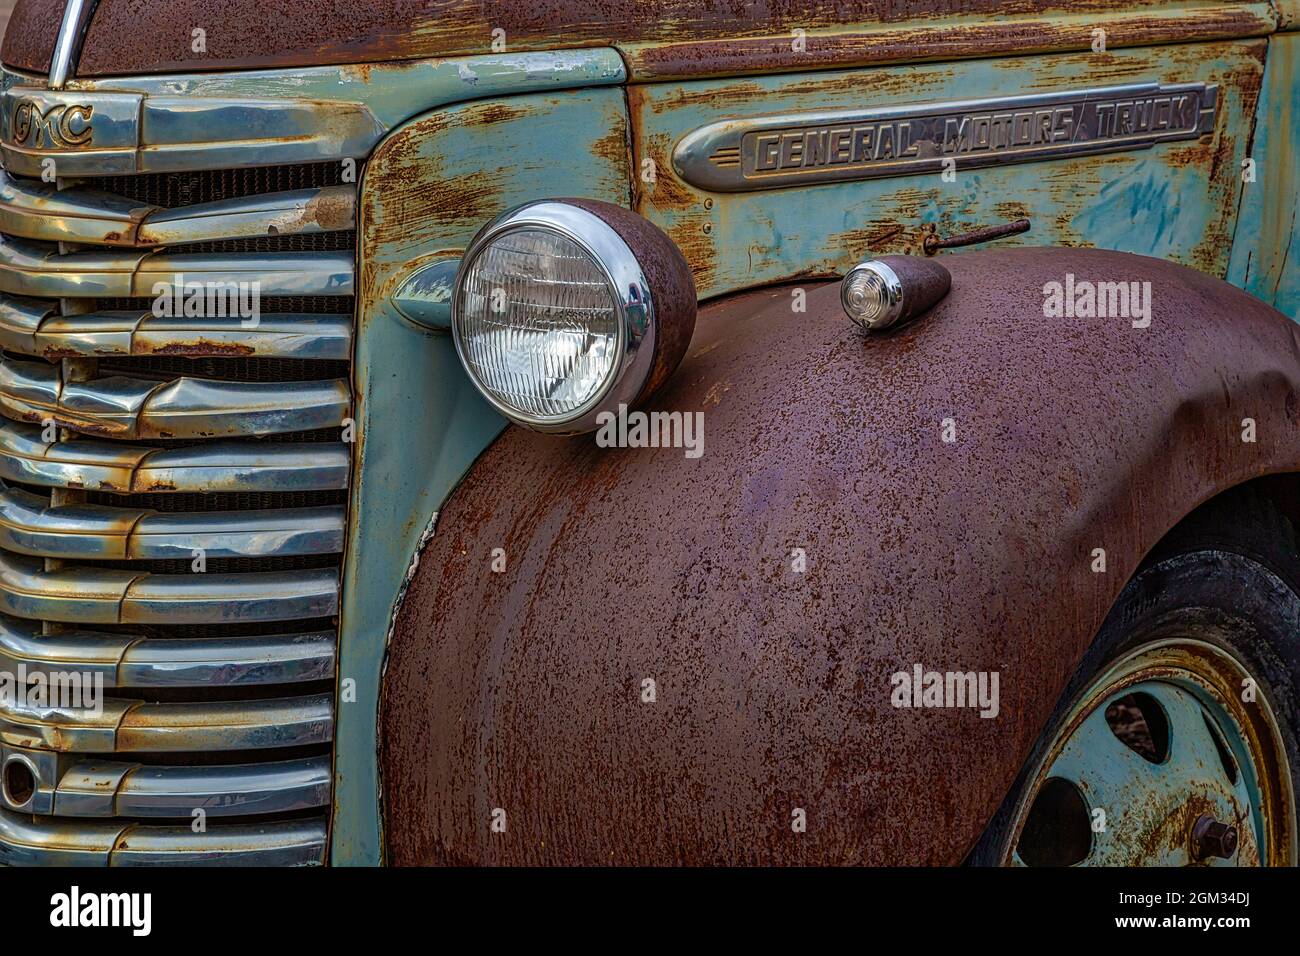 GMC General Motors Truck - Colorful rust and textures embody this vintage abandoned truck in a at a rural ghost town.  This image is available in colo Stock Photo